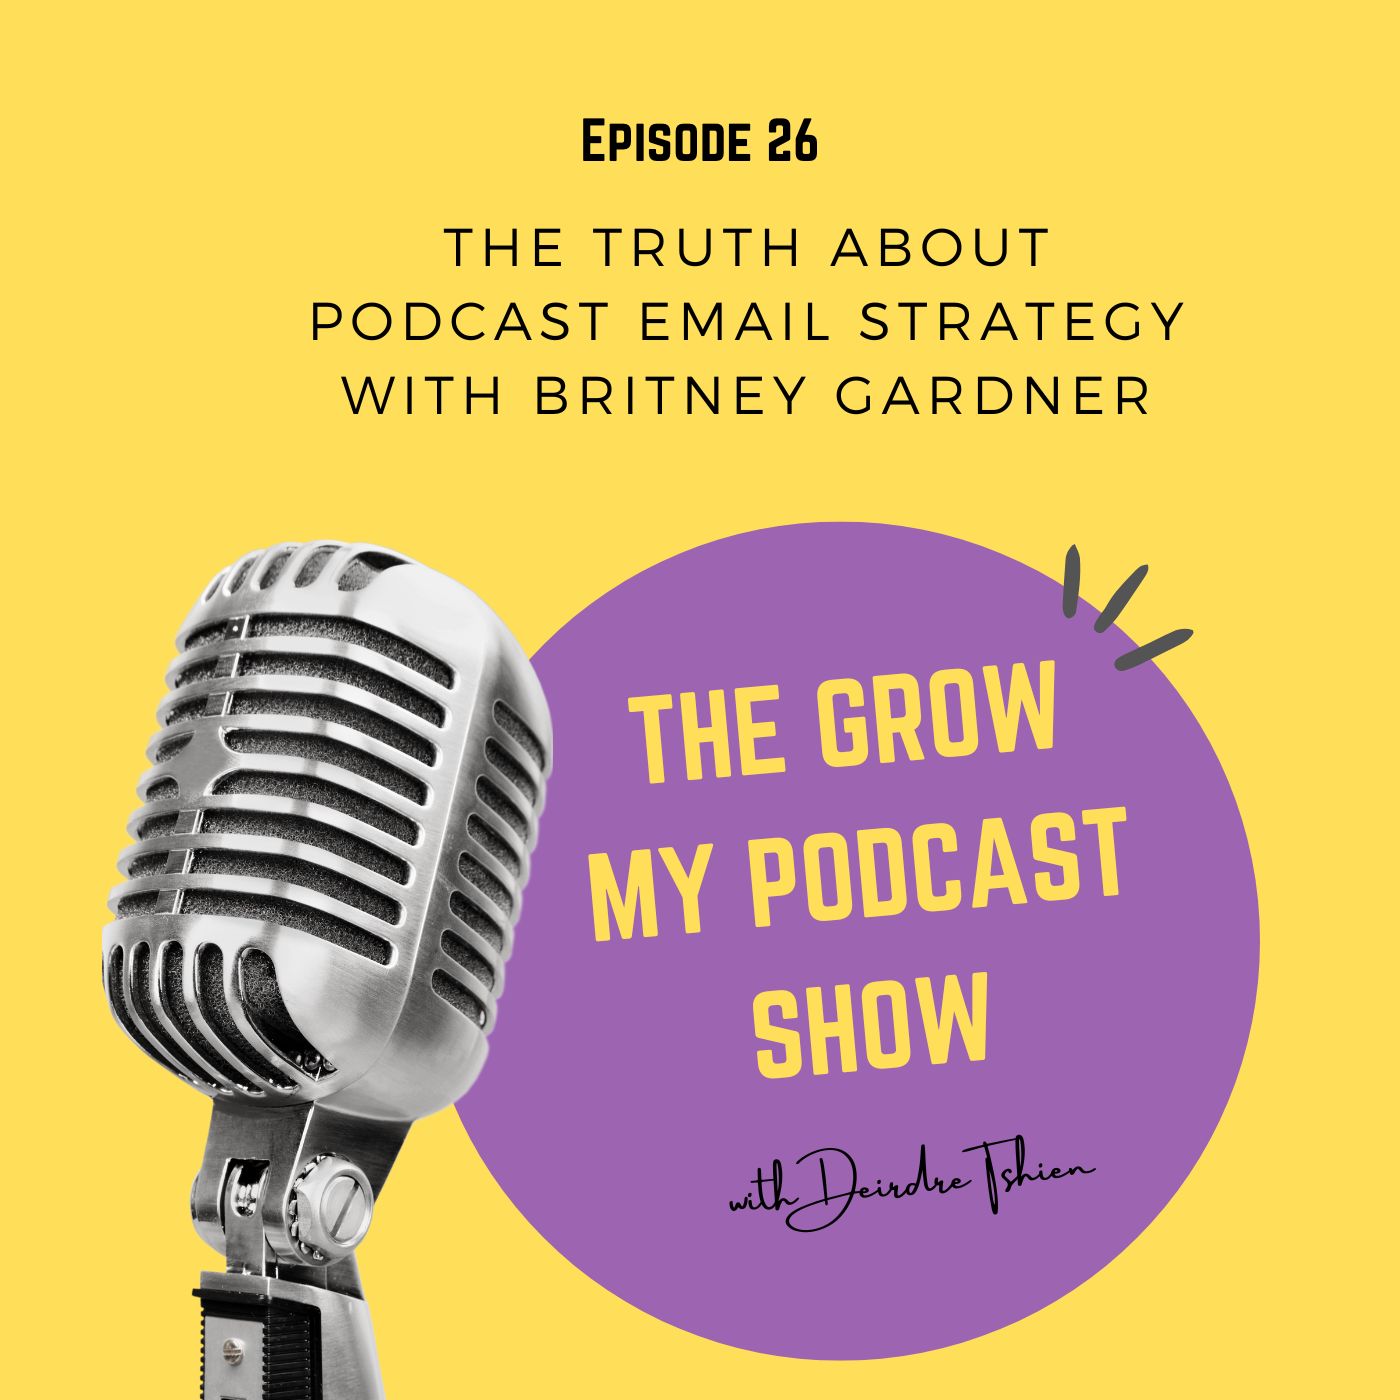 The Truth About Podcast Email Strategy with Britney Gardner